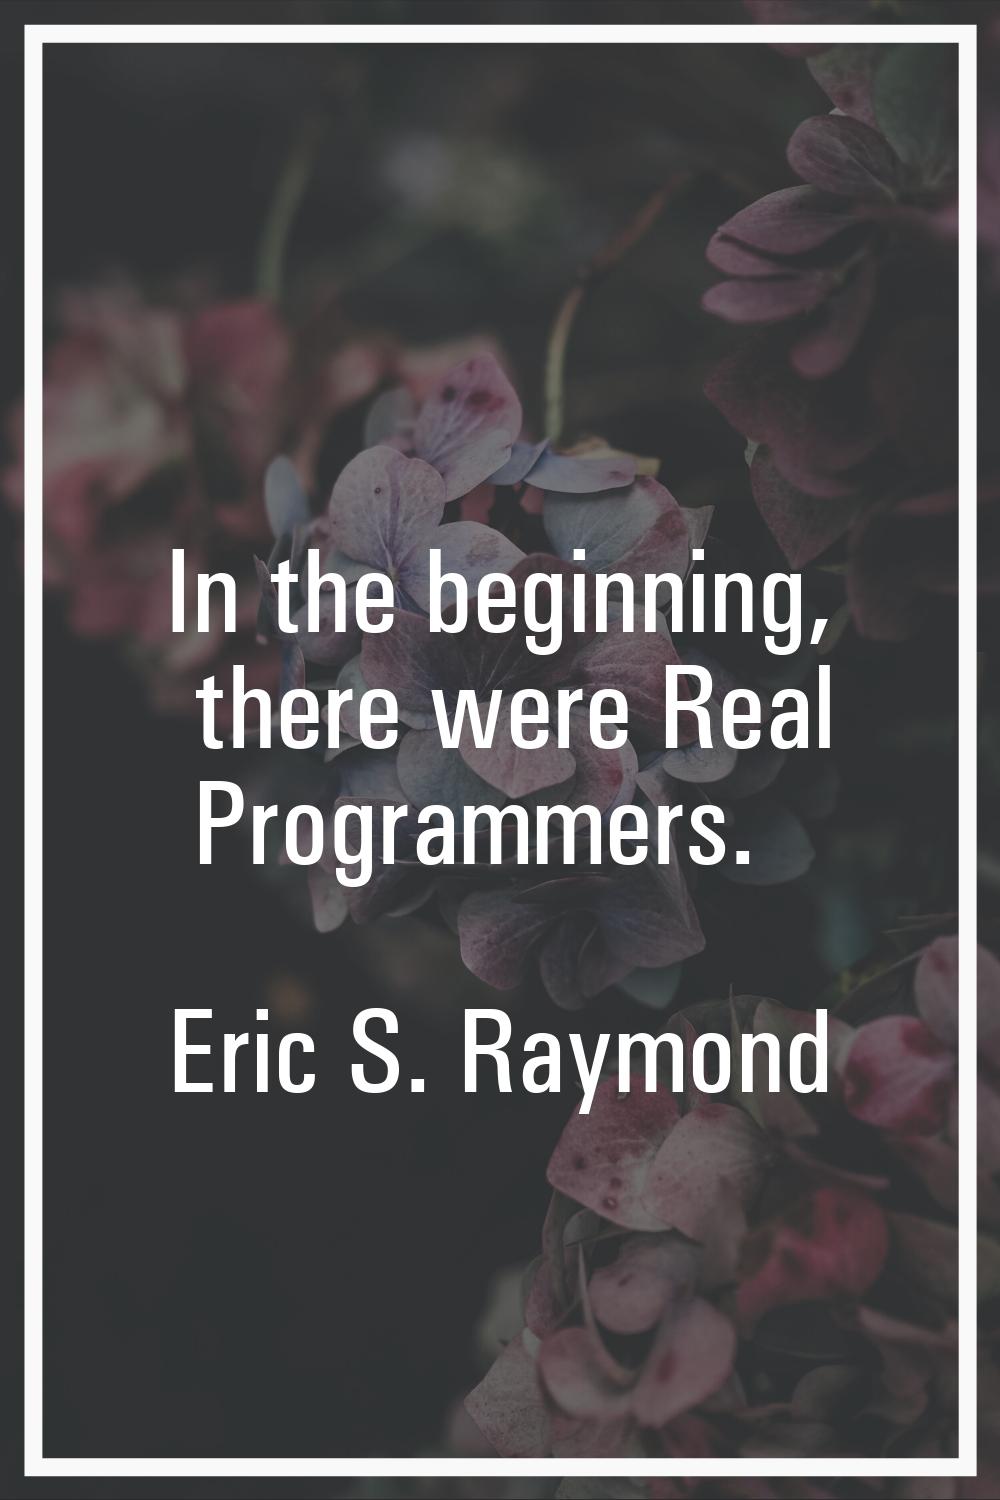 In the beginning, there were Real Programmers.